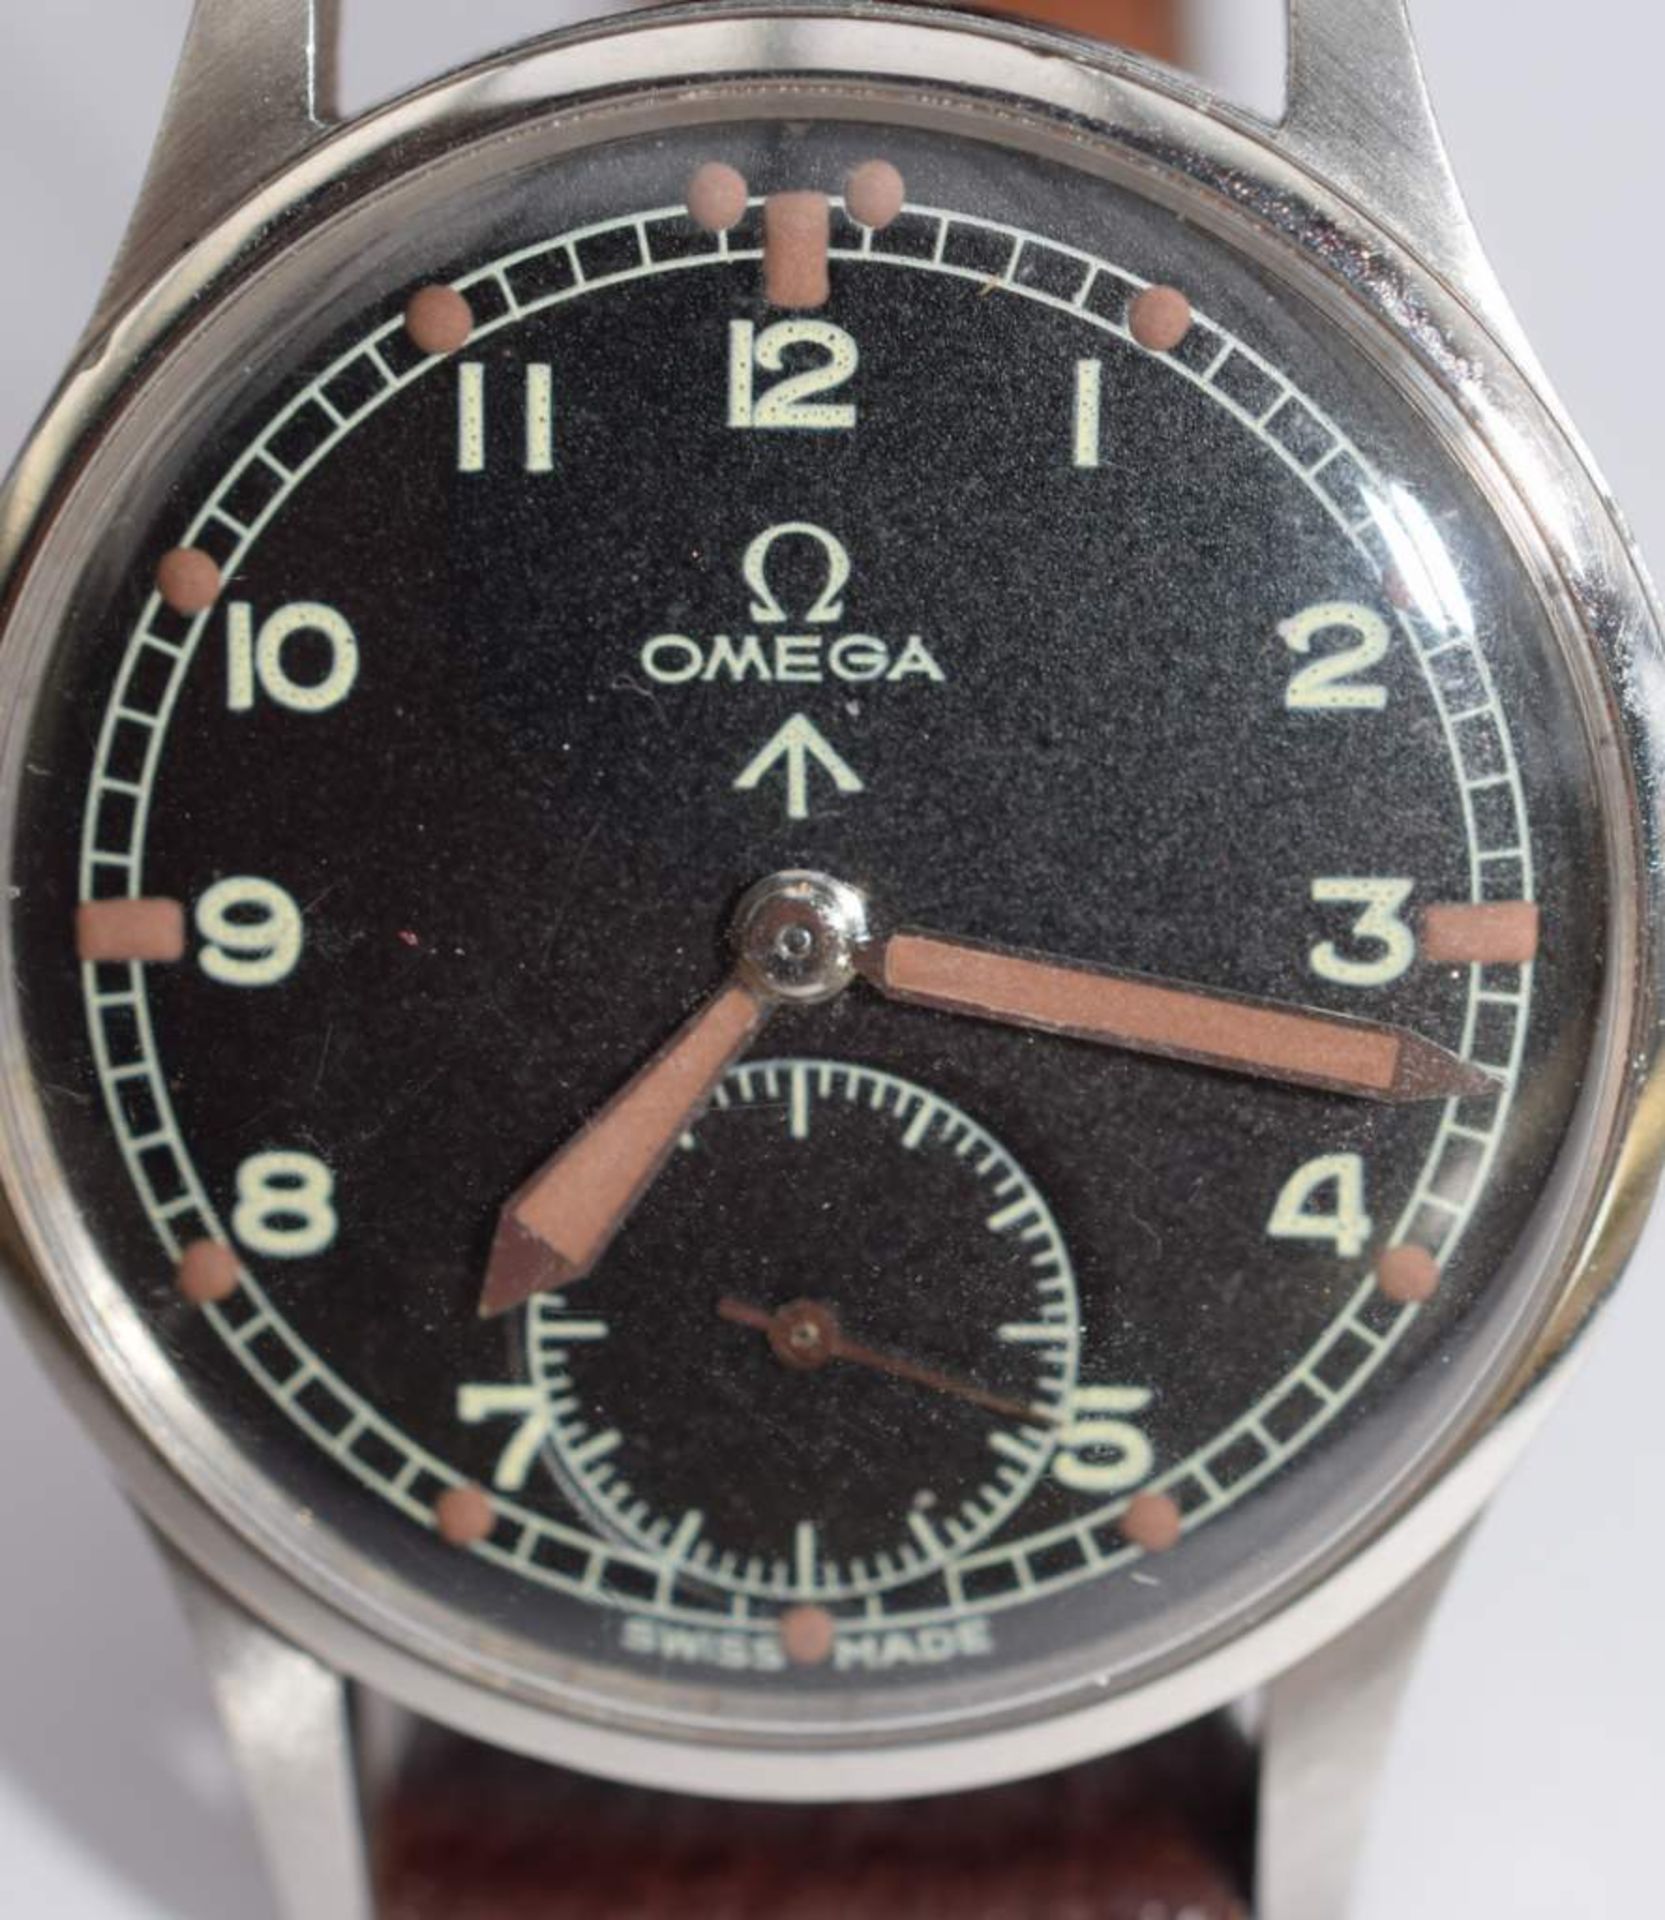 Omega WW2 Military Watch 'The Dirty Dozen' *Reserve reduced - 18.8.16* - Image 2 of 12